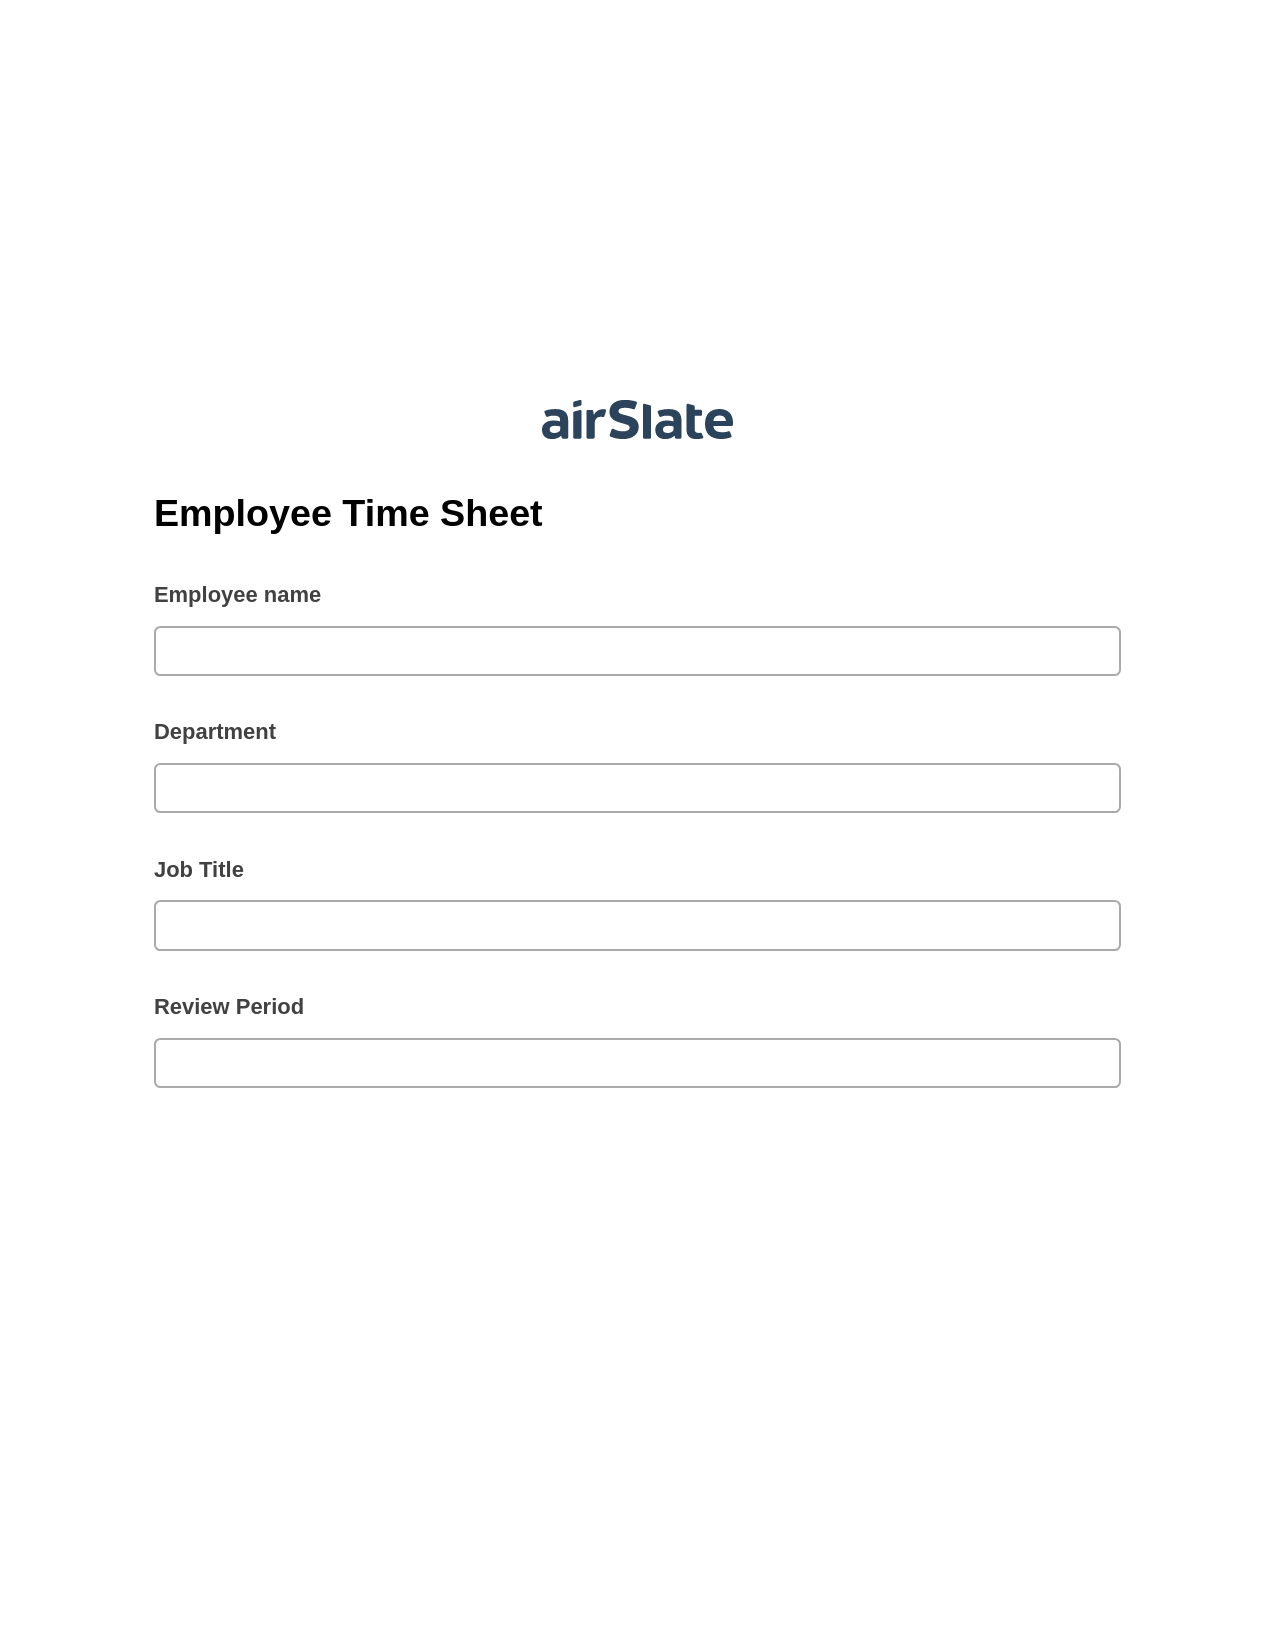 Employee Time Sheet Pre-fill from CSV File Bot, Update Audit Trail Bot, Export to MySQL Bot